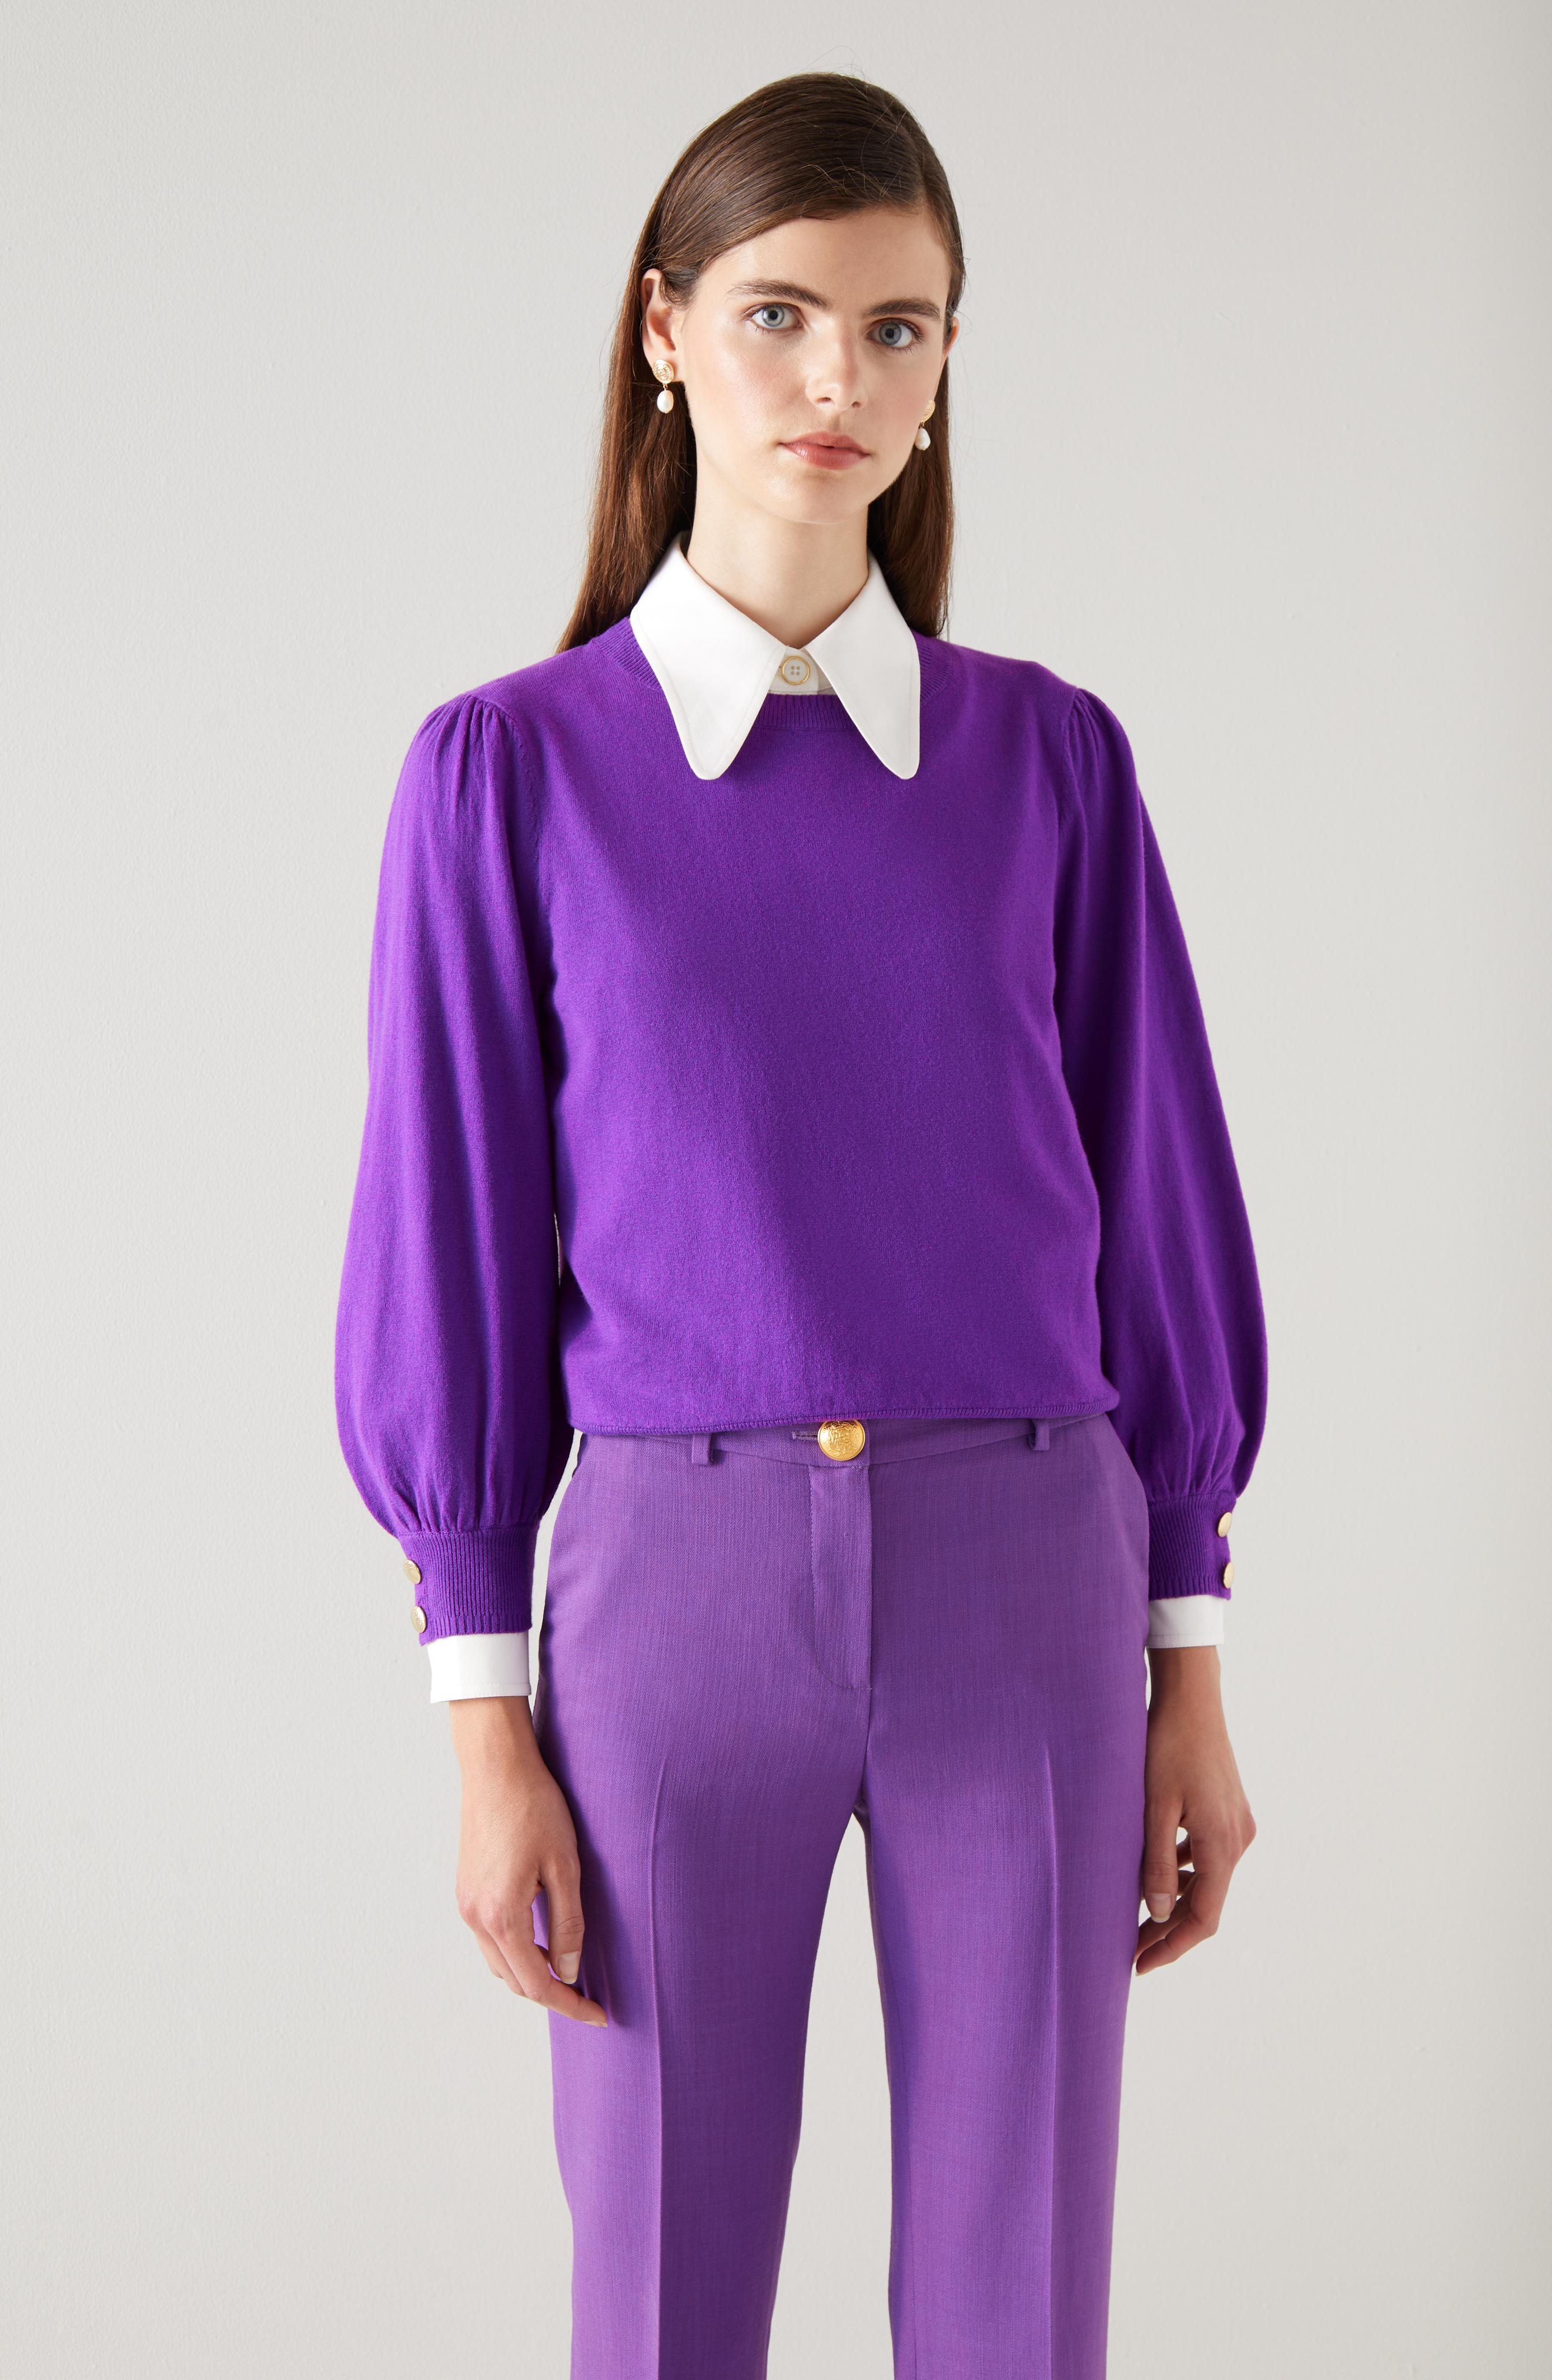 L.K.Bennett Diana Purple Cotton and Sustainably Sourced Merino Jumper Violet, Violet